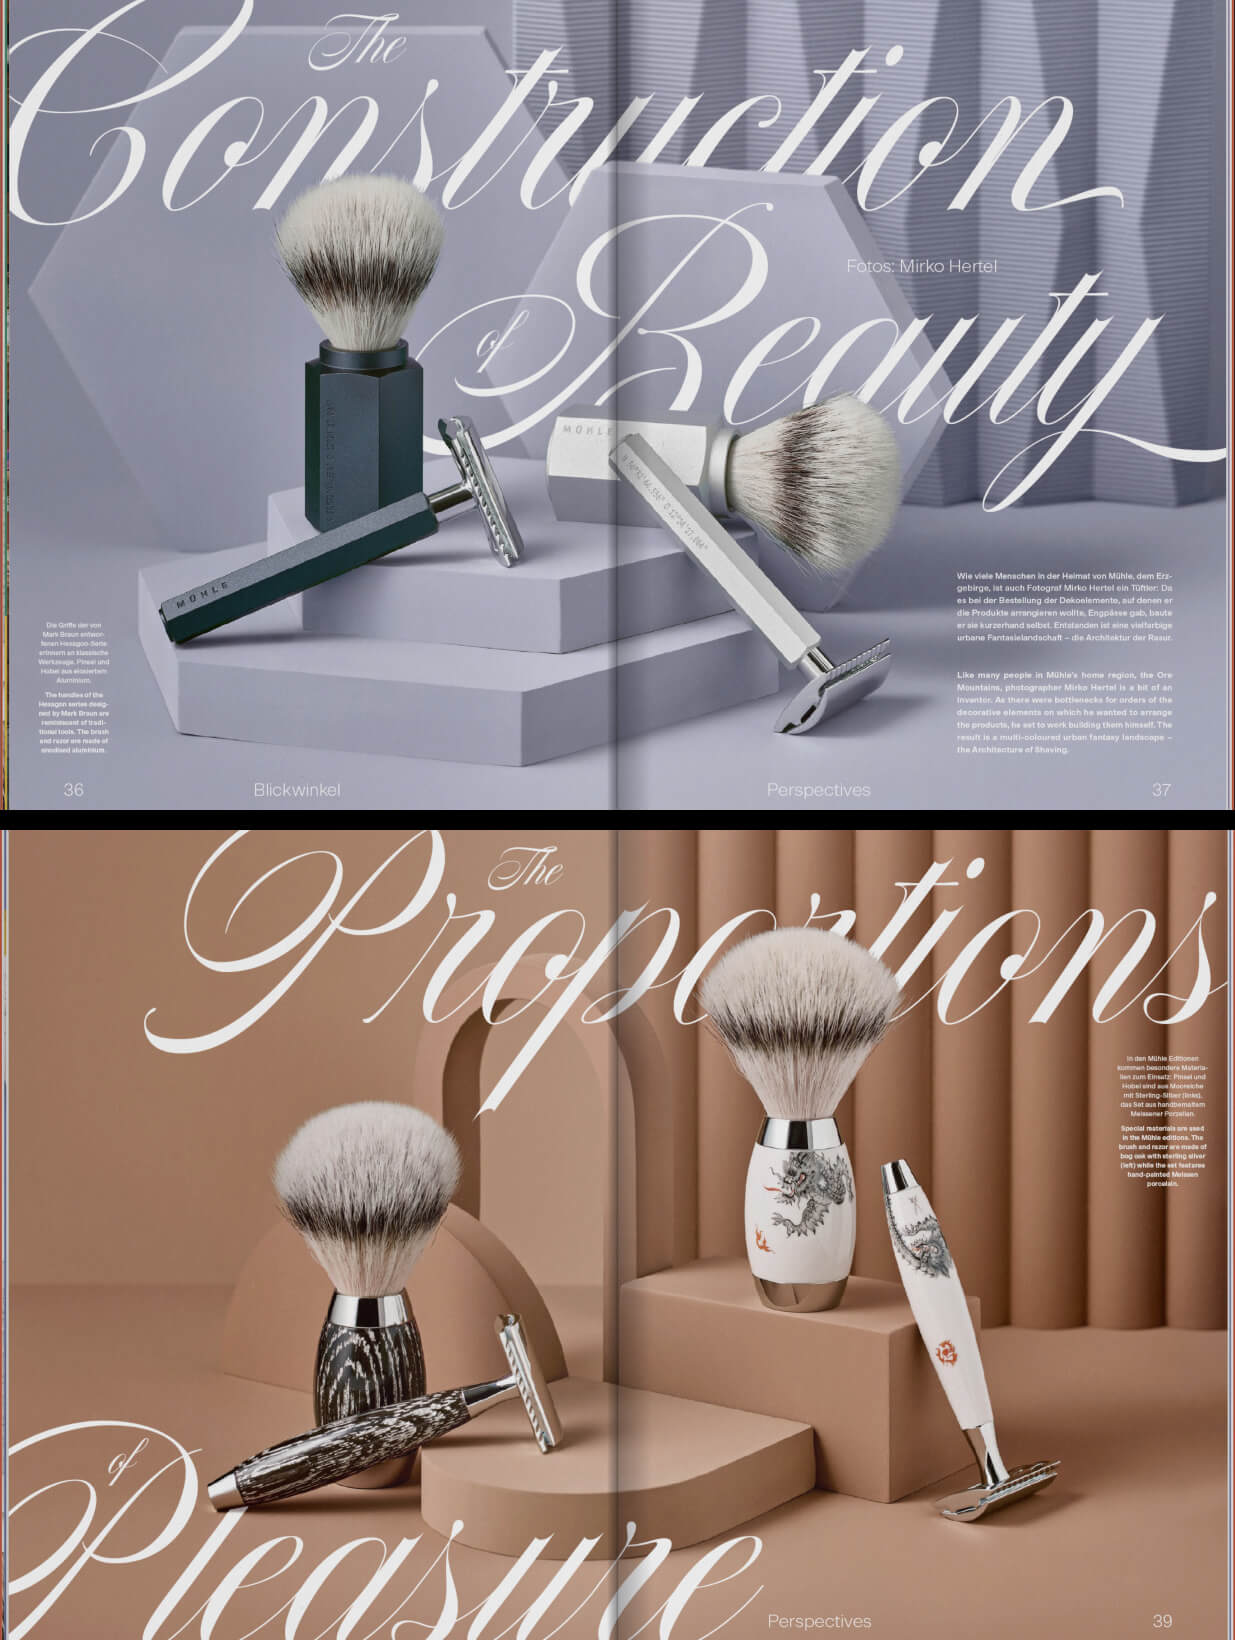 The magazine for shaving and culture